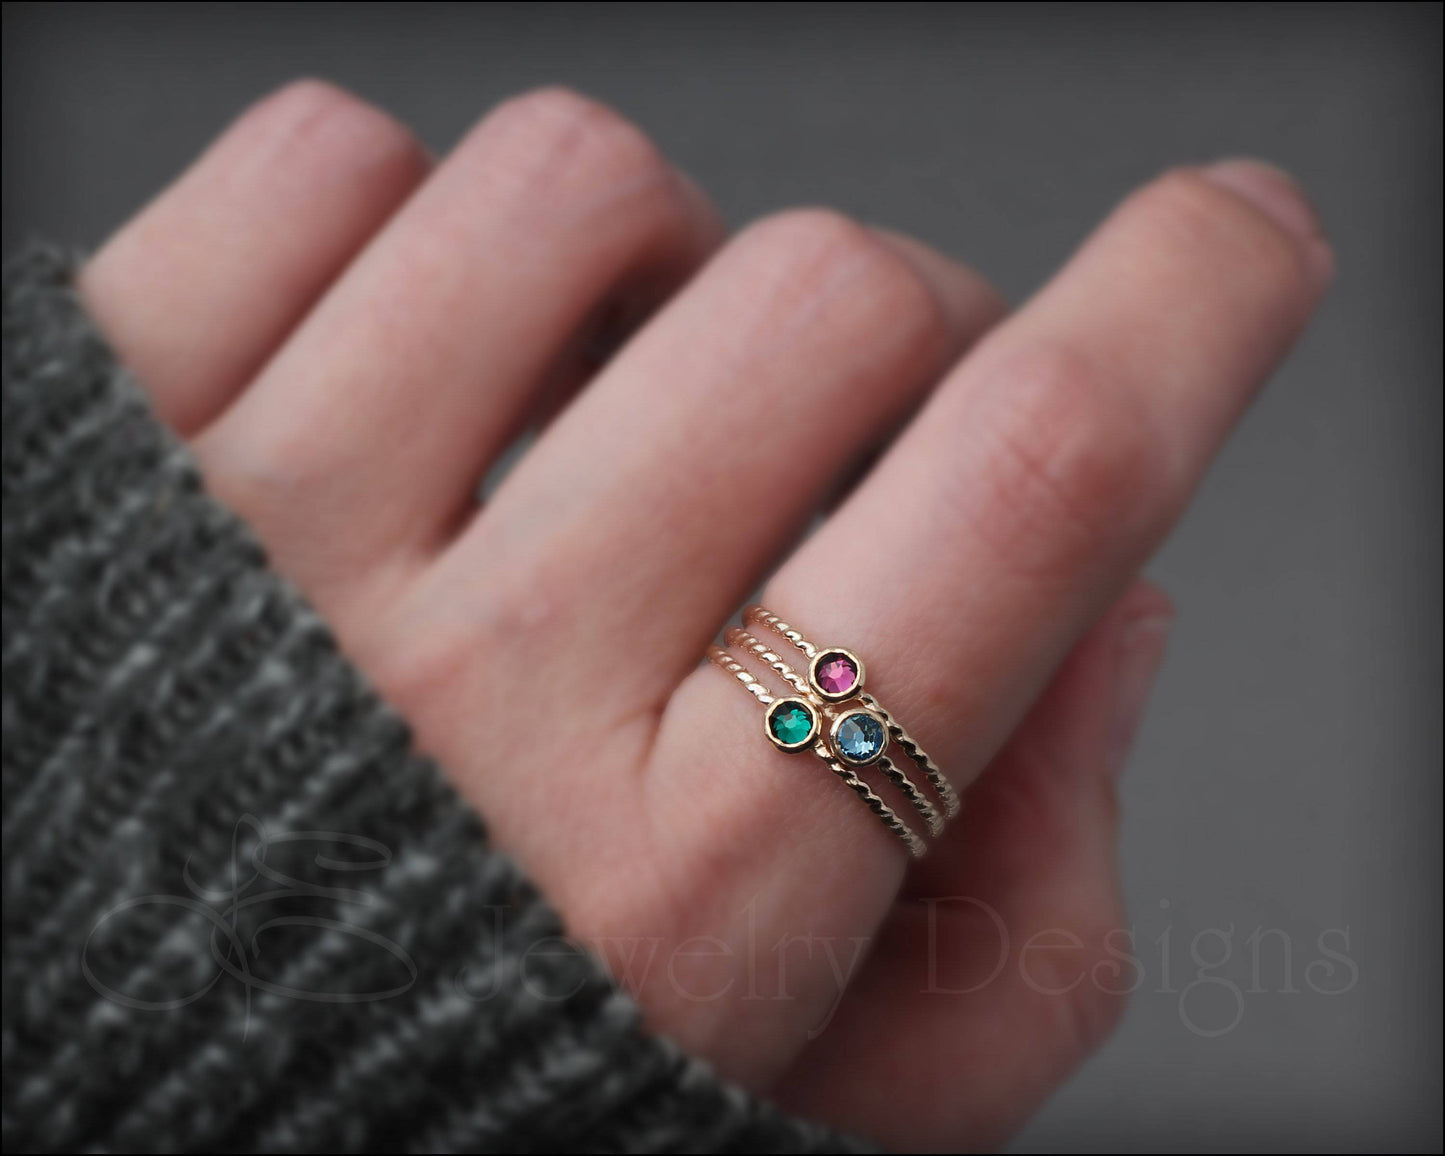 Load image into Gallery viewer, Twisted Birthstone Ring (silver, gold, rose gold) - LE Jewelry Designs
